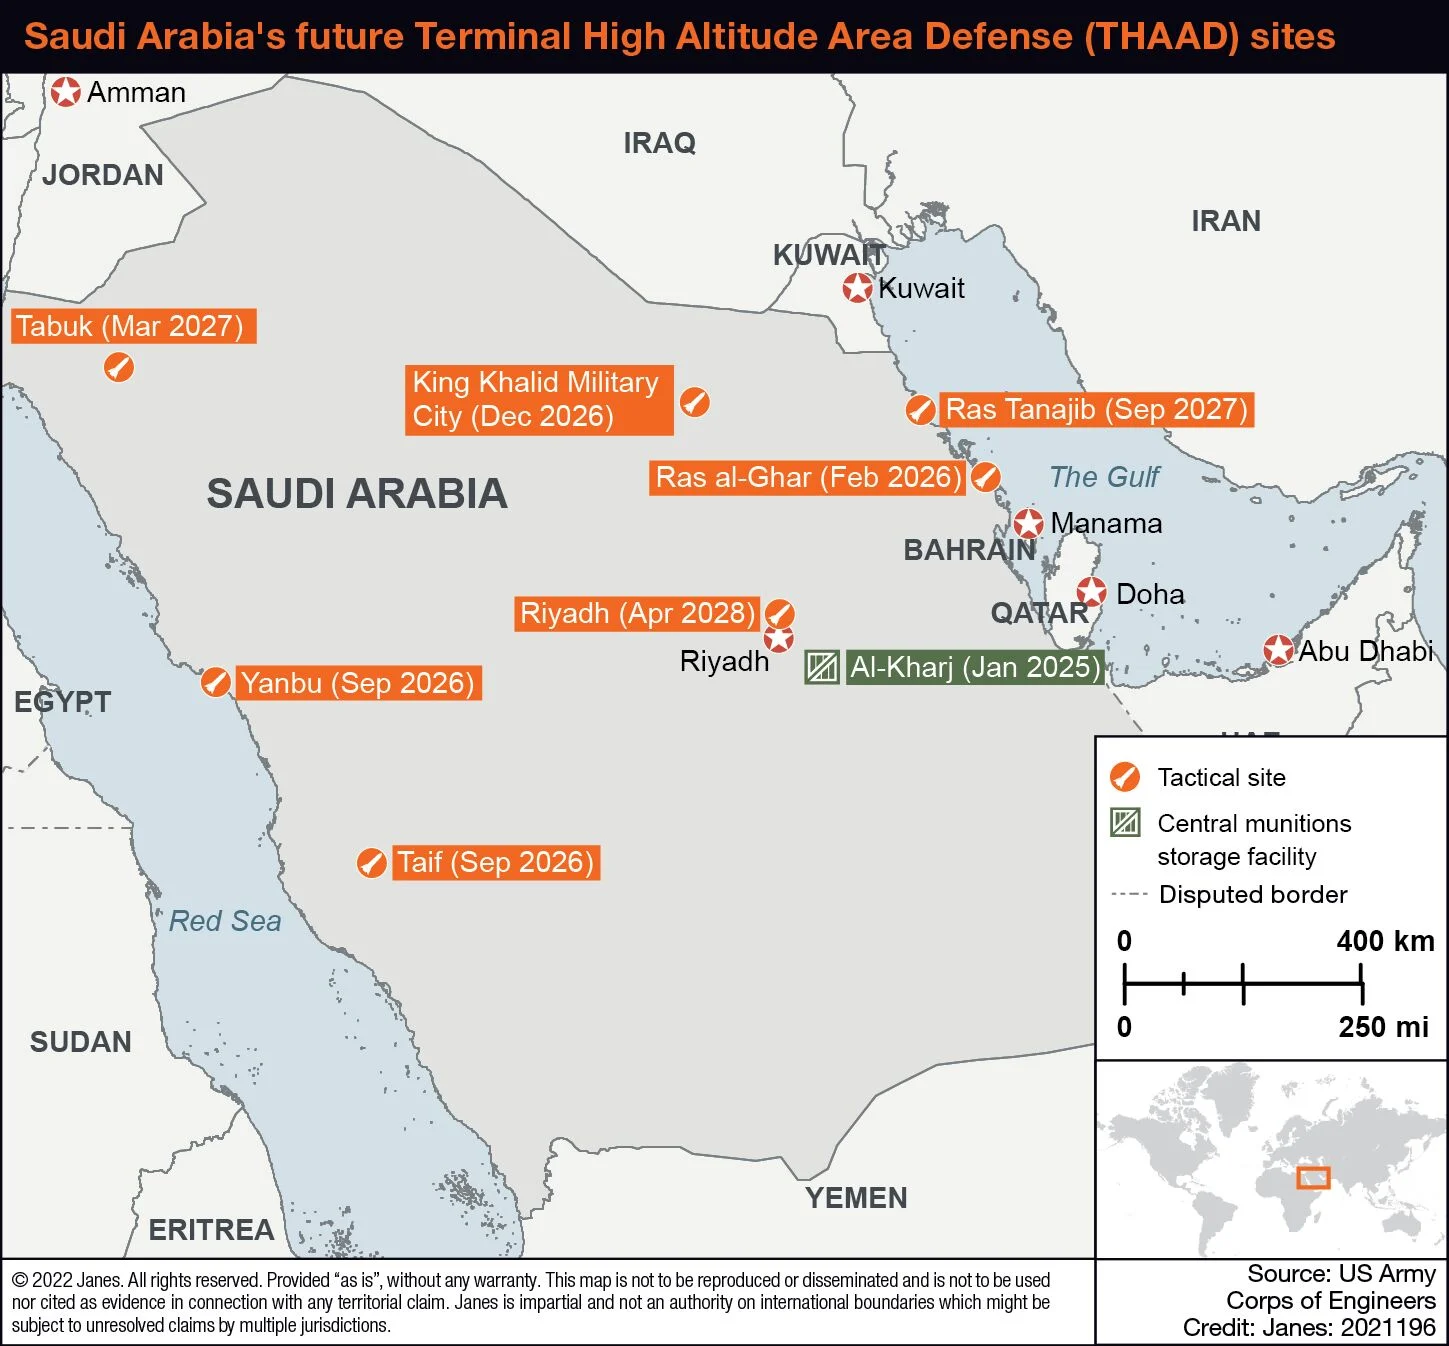 The map showcases the approximate locations of future Saudi THAAD sites, source: Janes